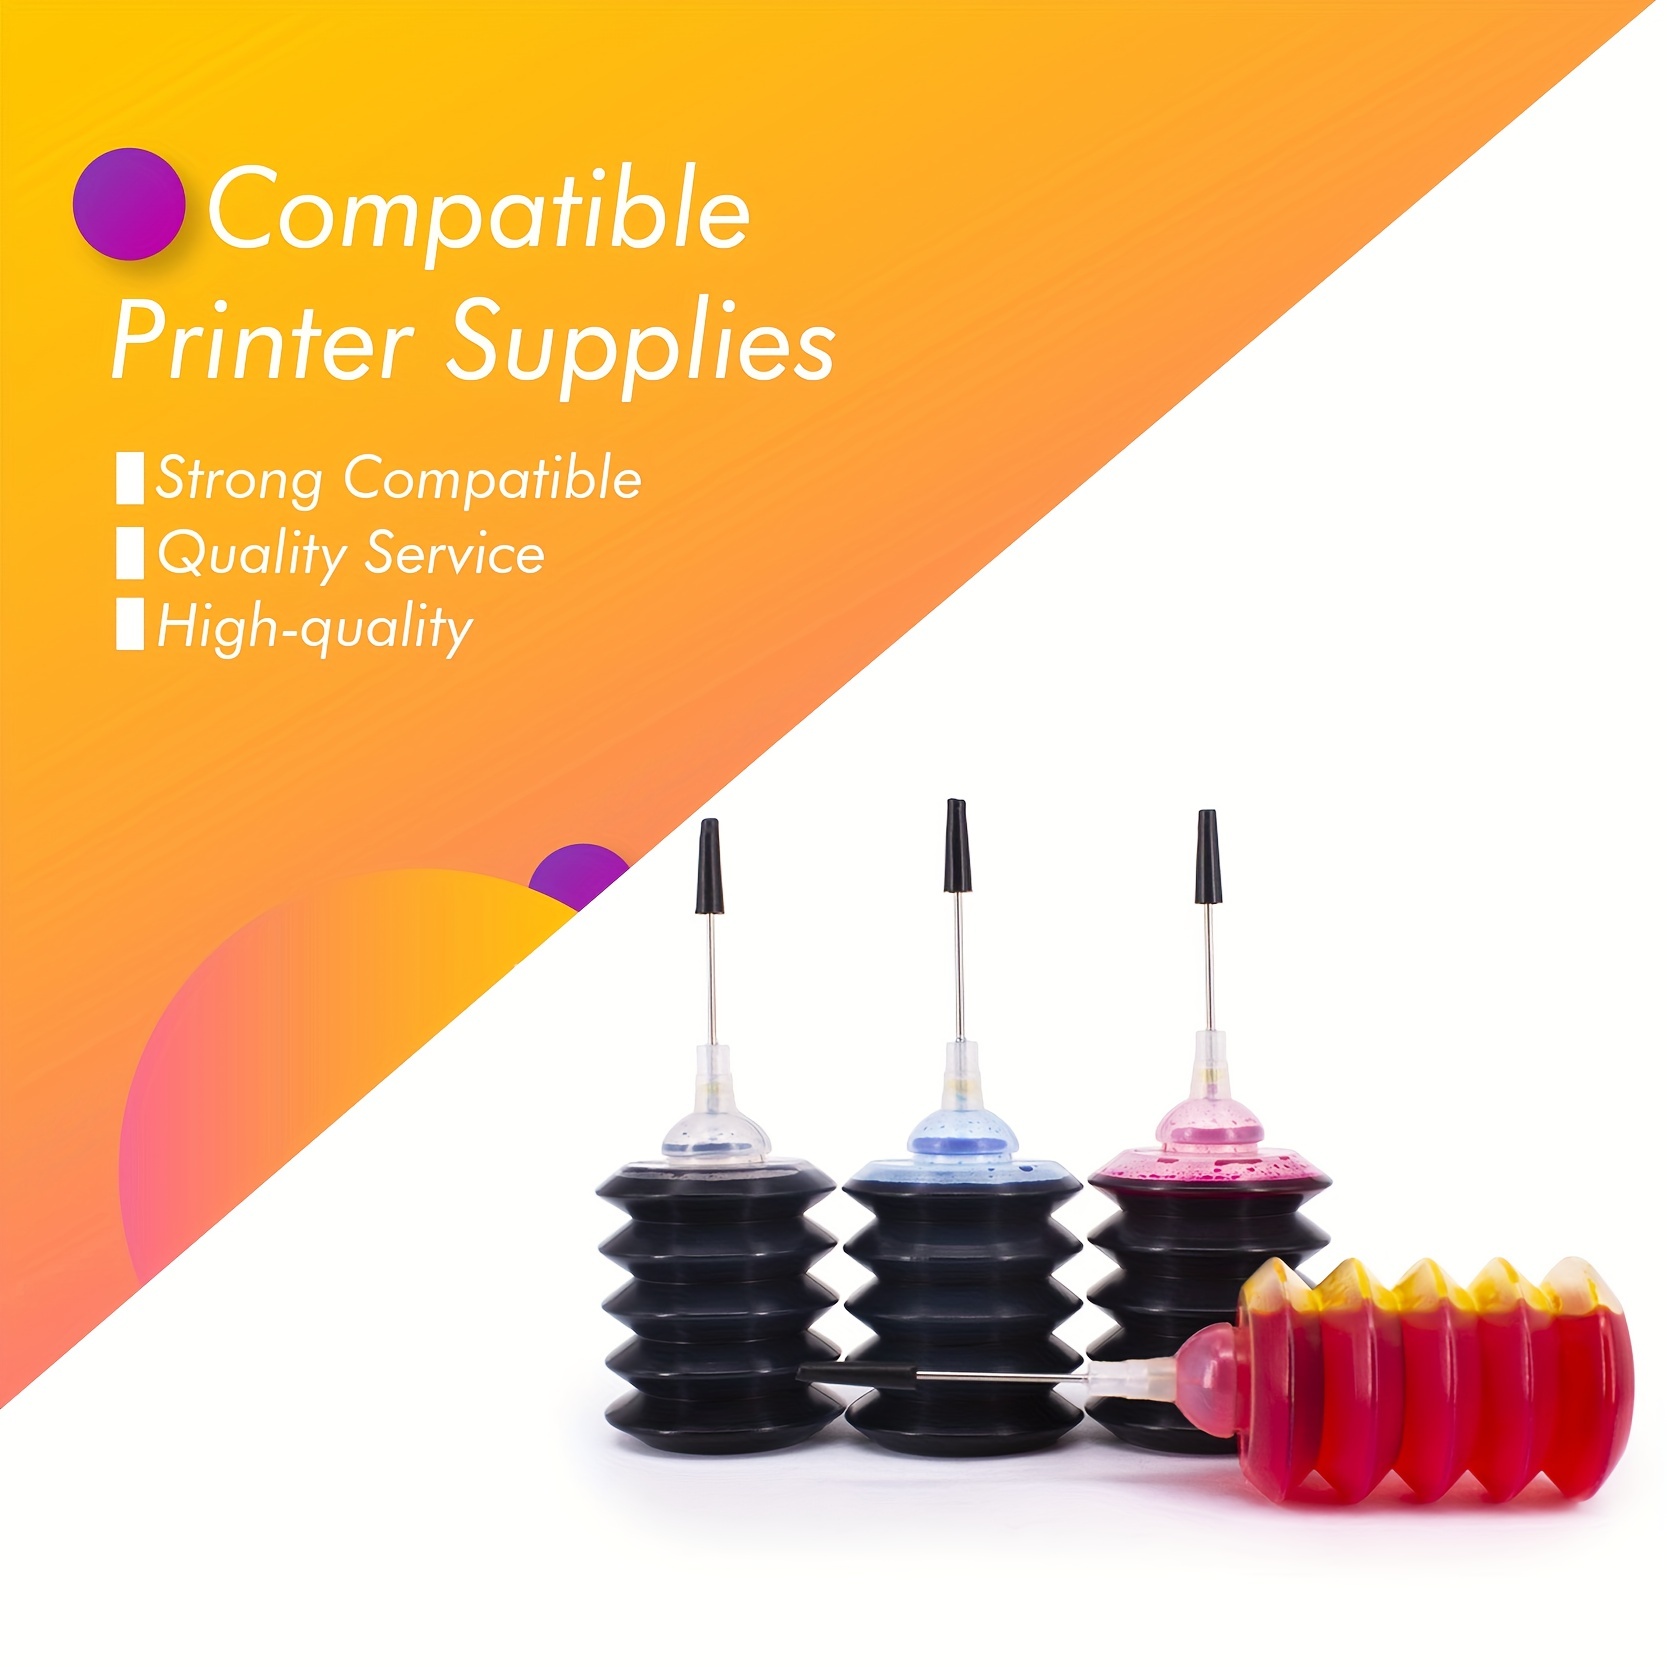 Ink Refill Kit that Works For Canon PG-275 Black Cartridges Canon